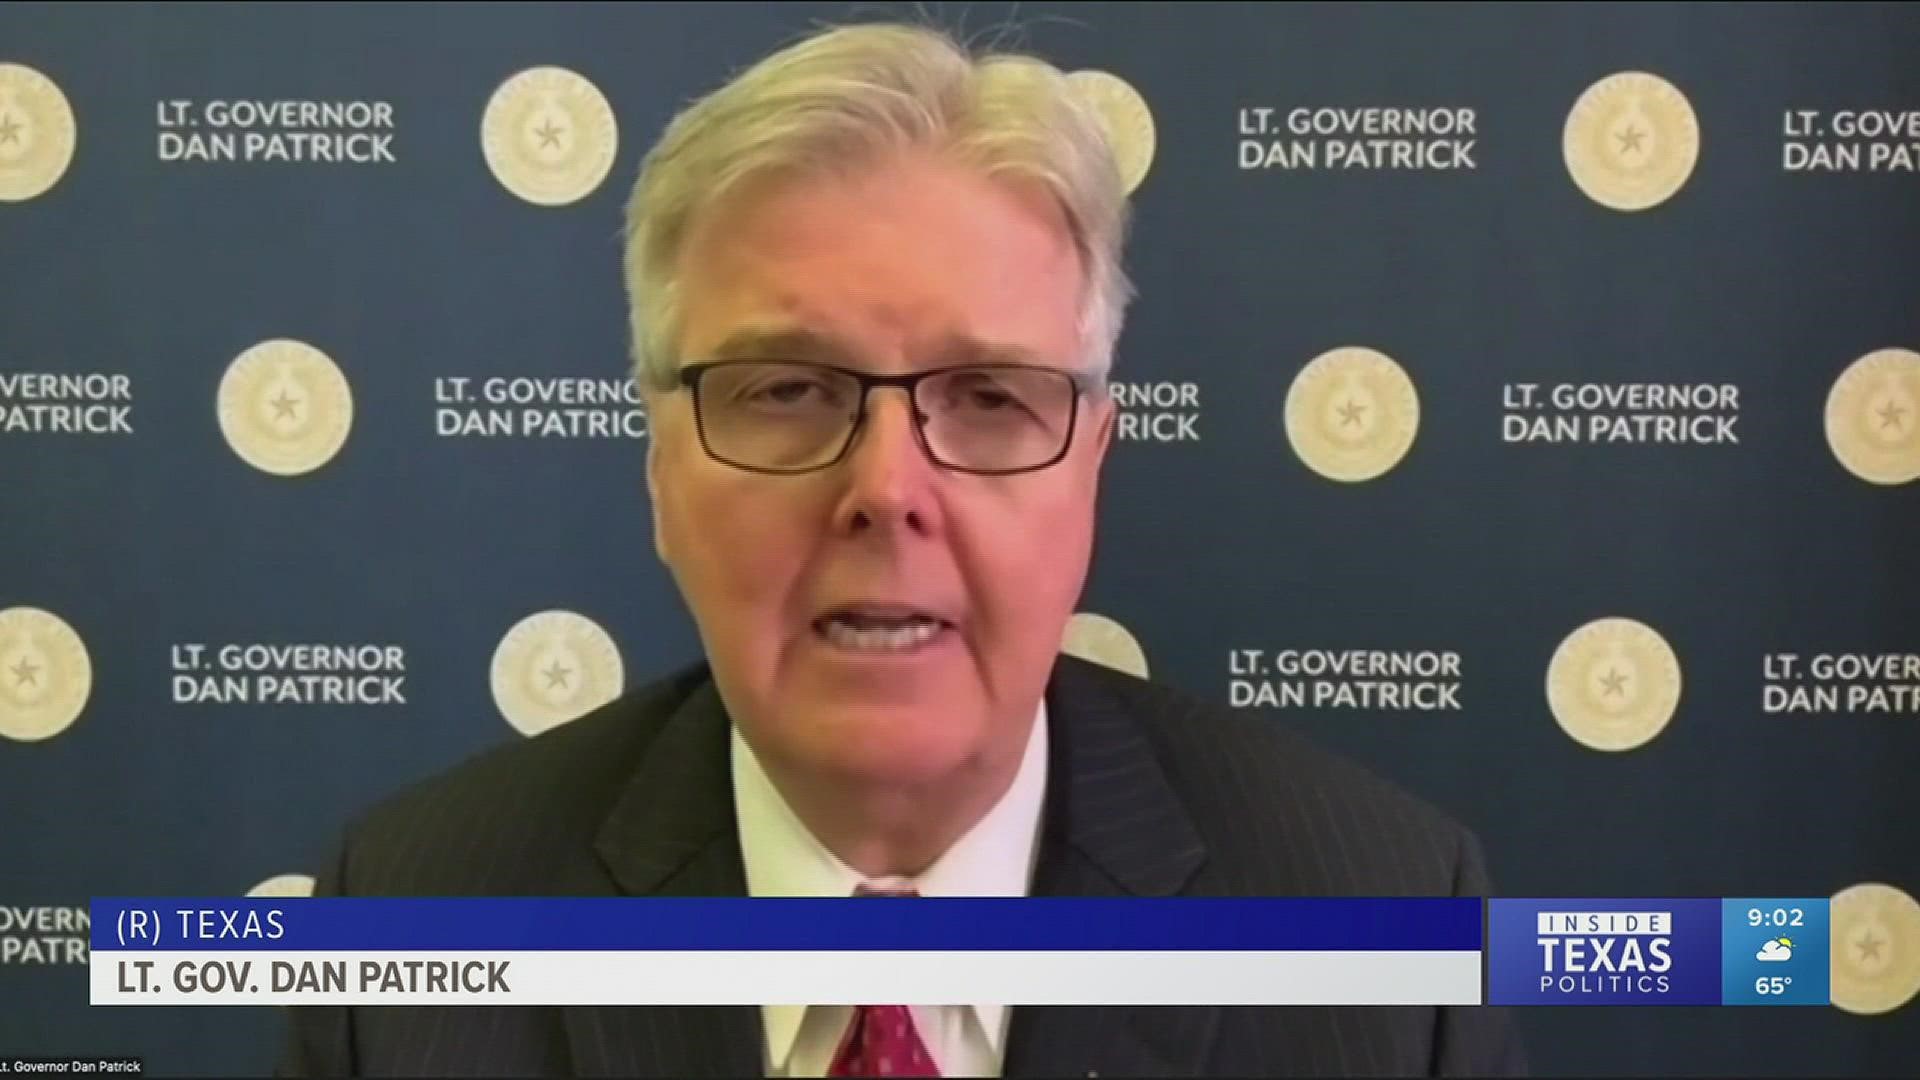 Lt. Gov. Dan Patrick joined Inside Texas Politics for a discussion on redistricting and the new Texas abortion law.